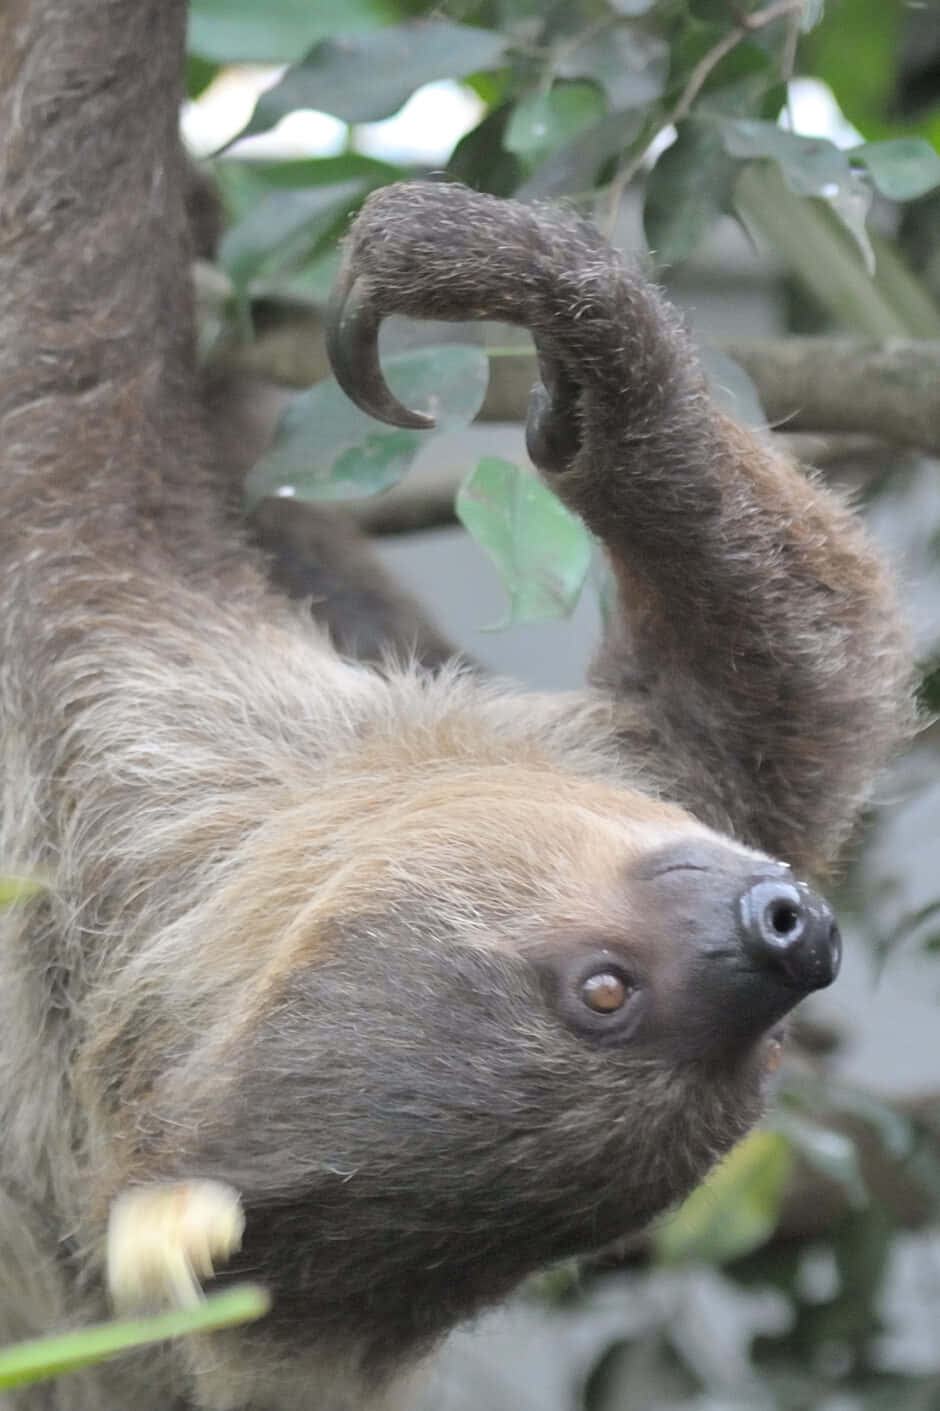 A lazy sloth living its best life.